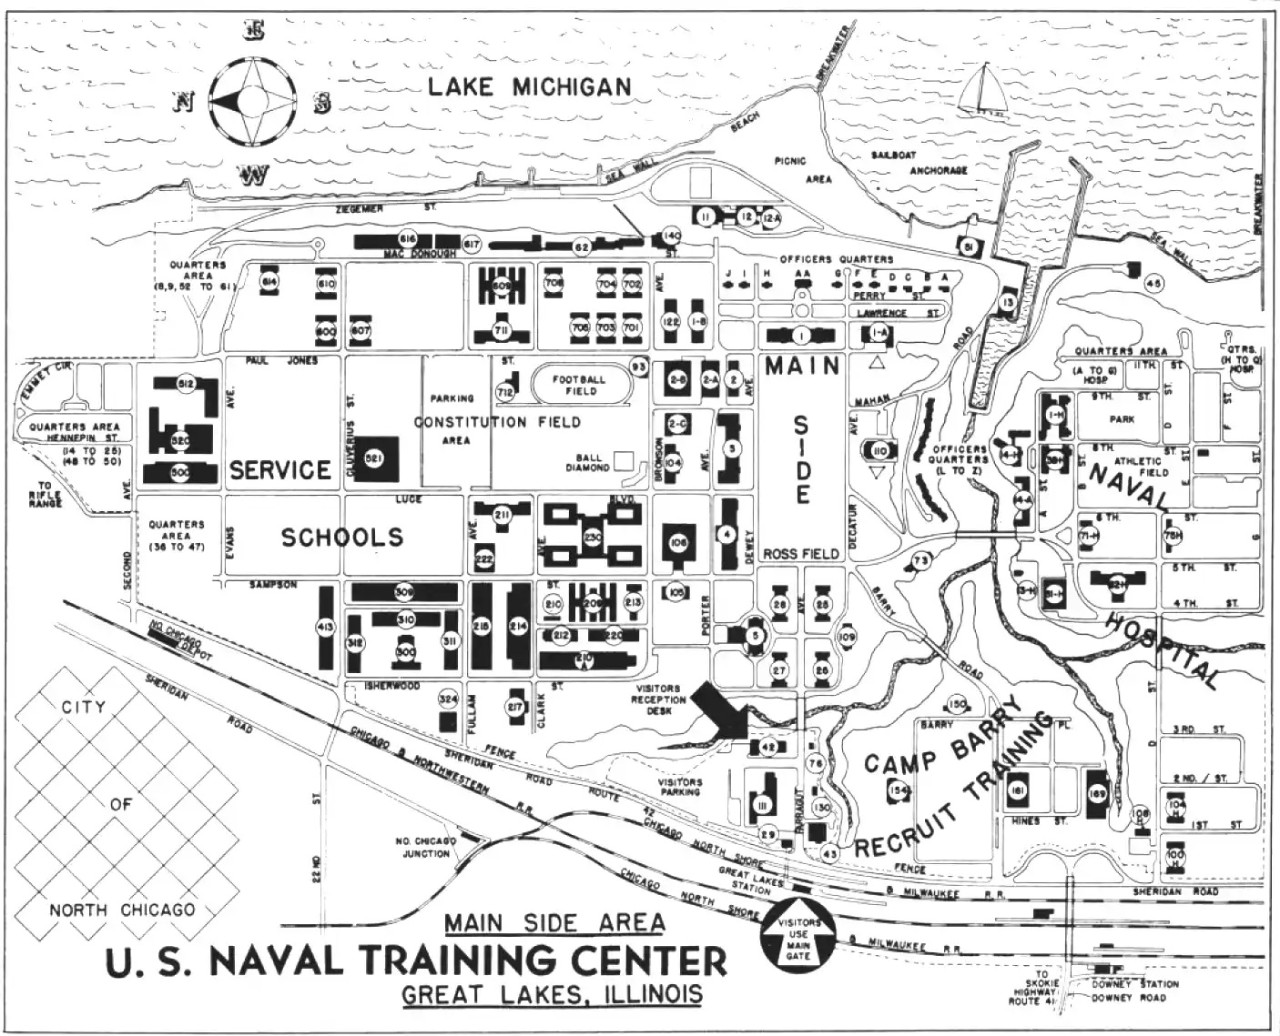 Black and white aerial map of the base with the lakefront at the top, oriented to the east.